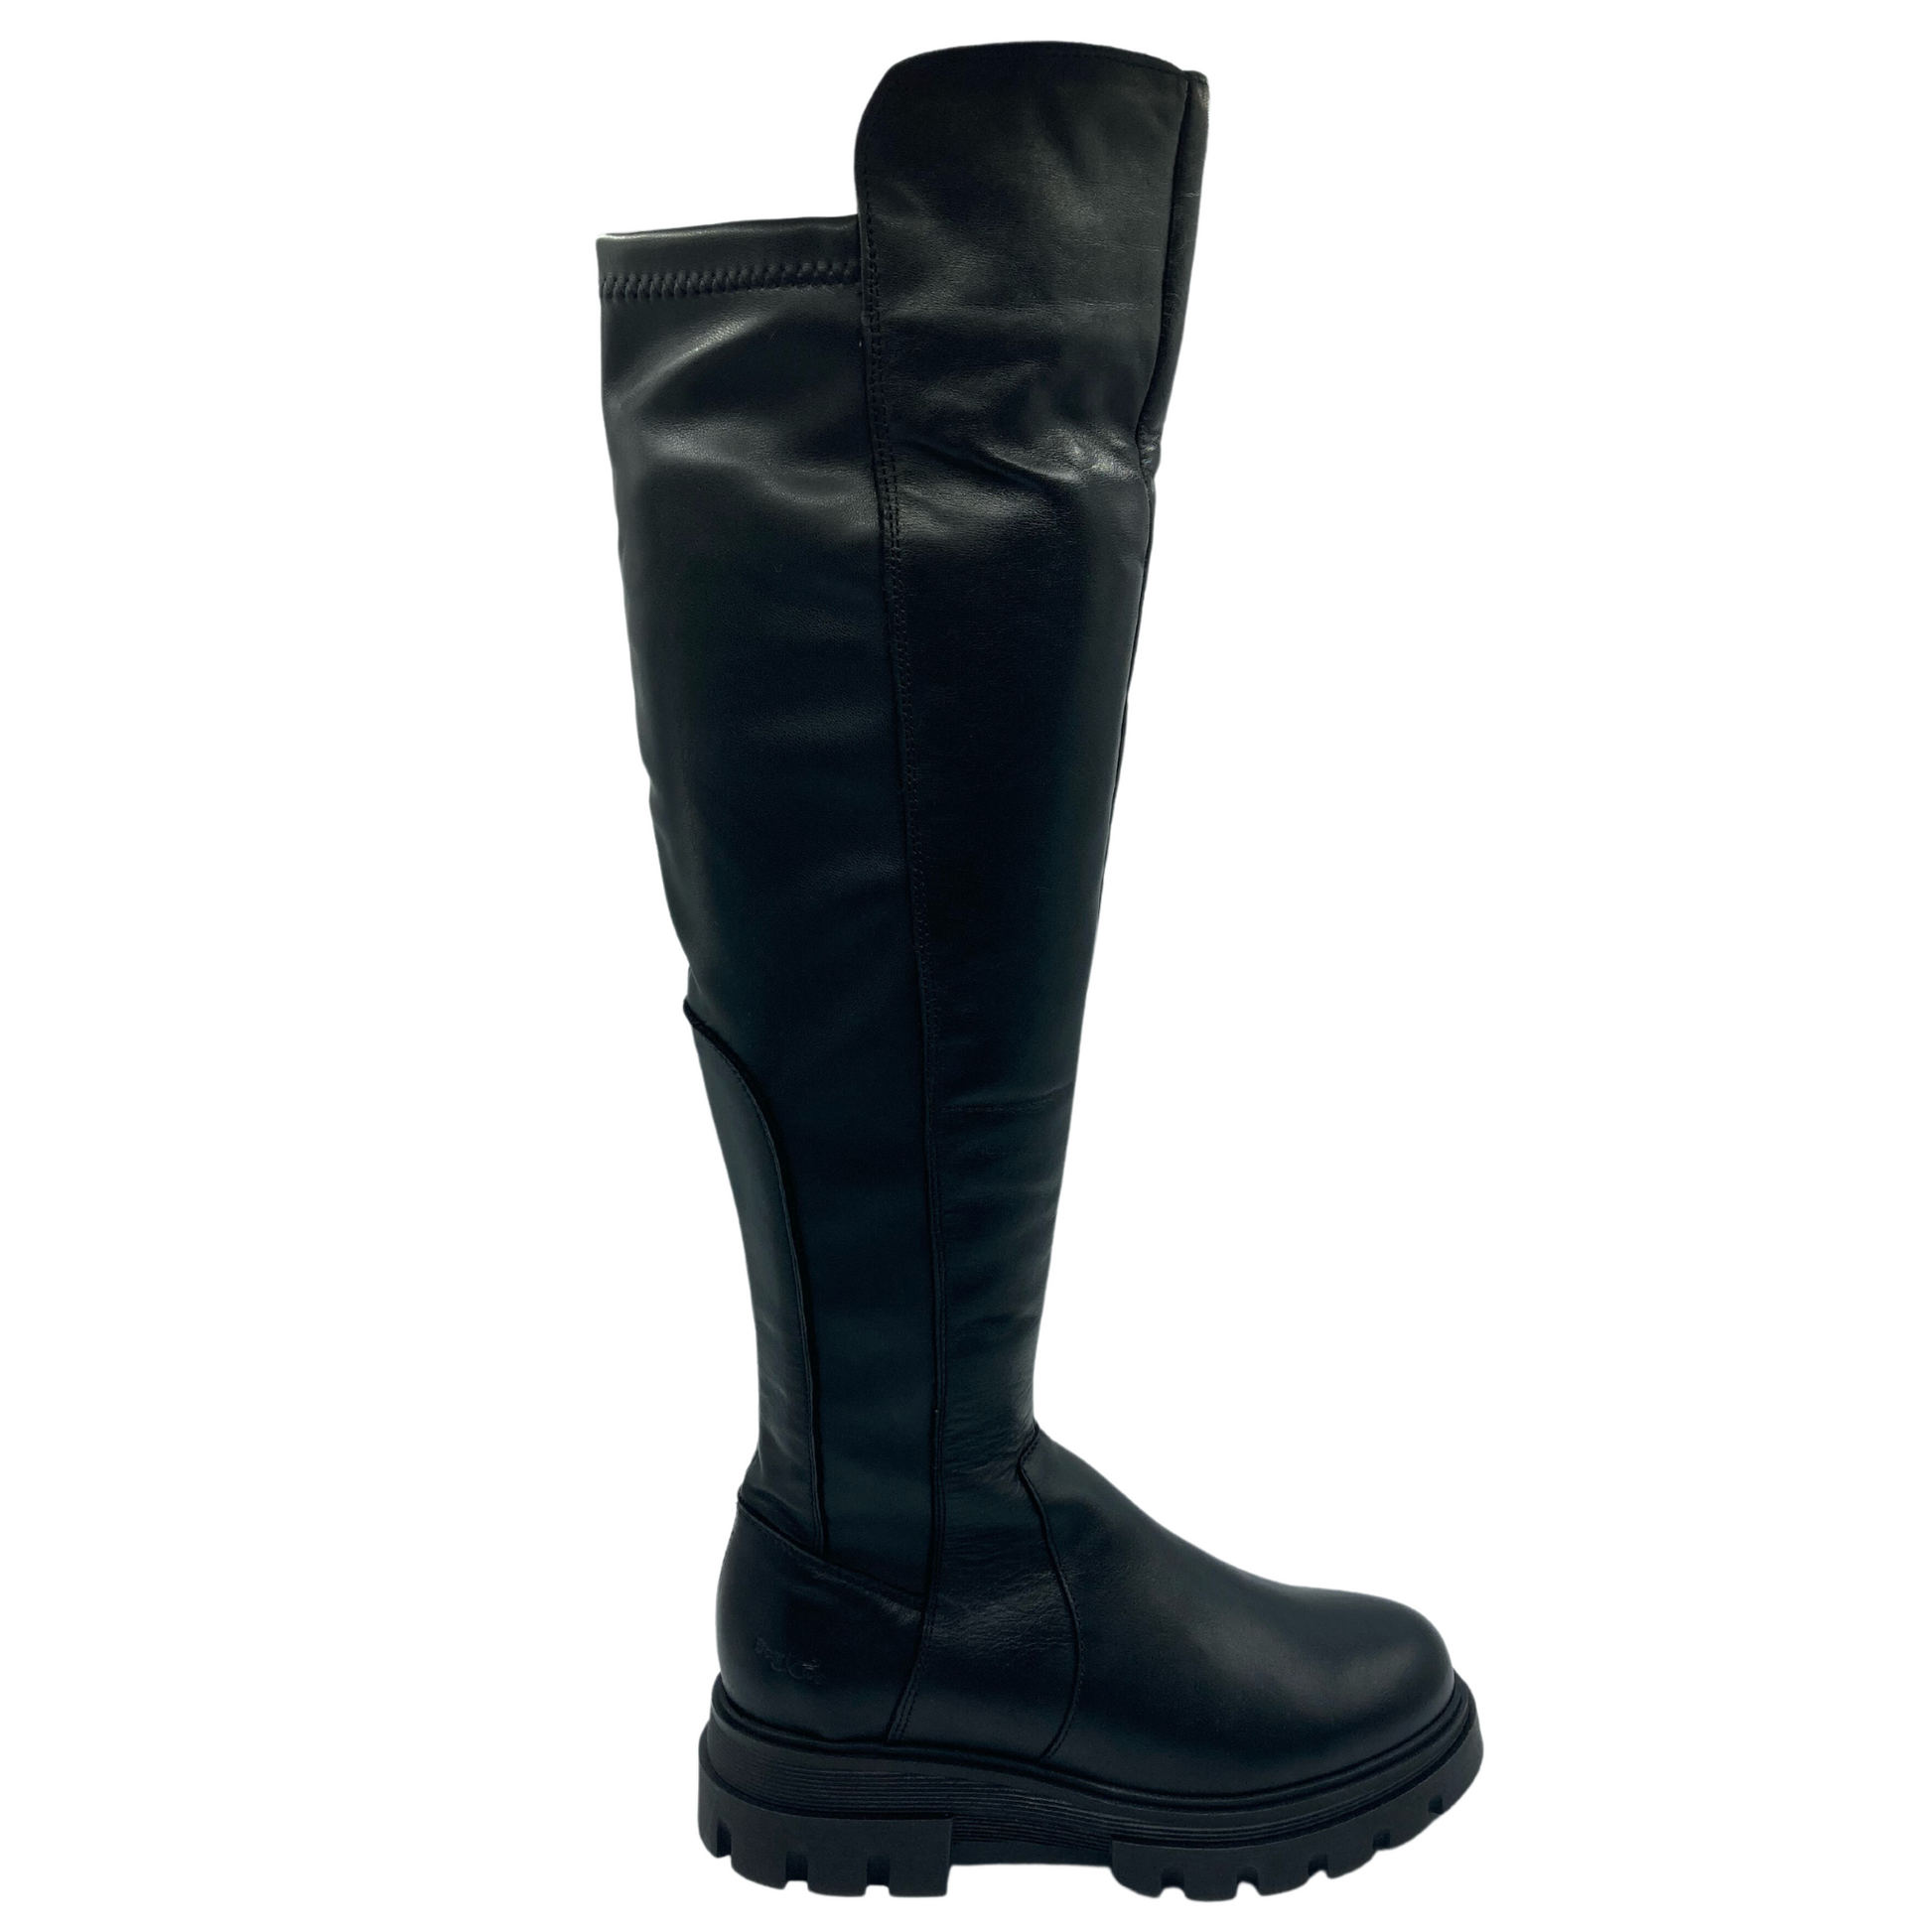 Right facing view of black leather thigh high boot with rounded toe and platform rubber sole